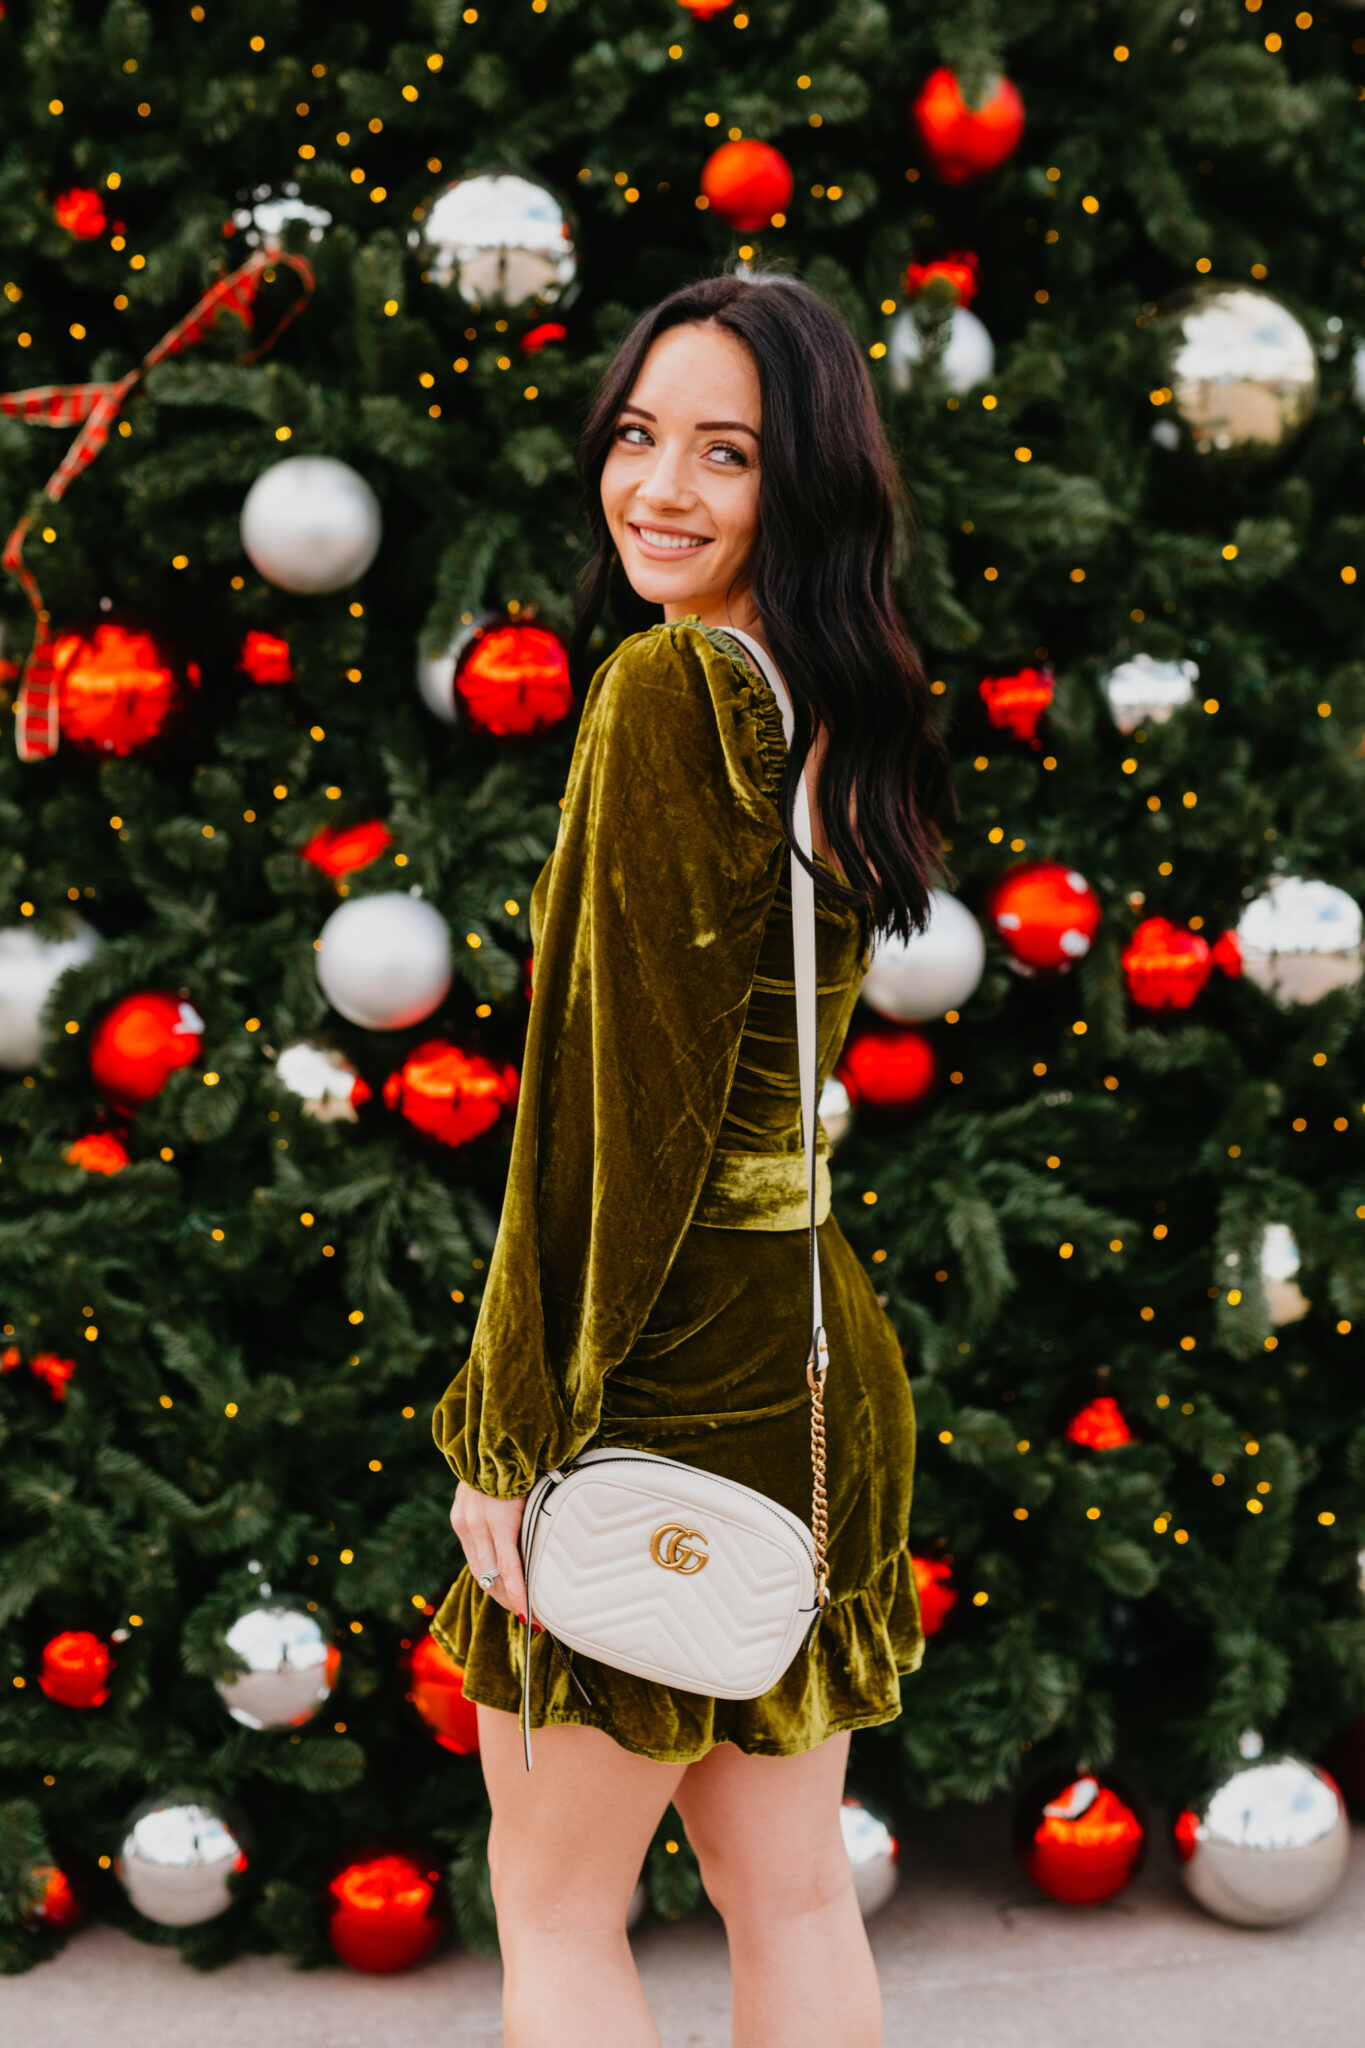 Christmas outfit ideas to inspire you